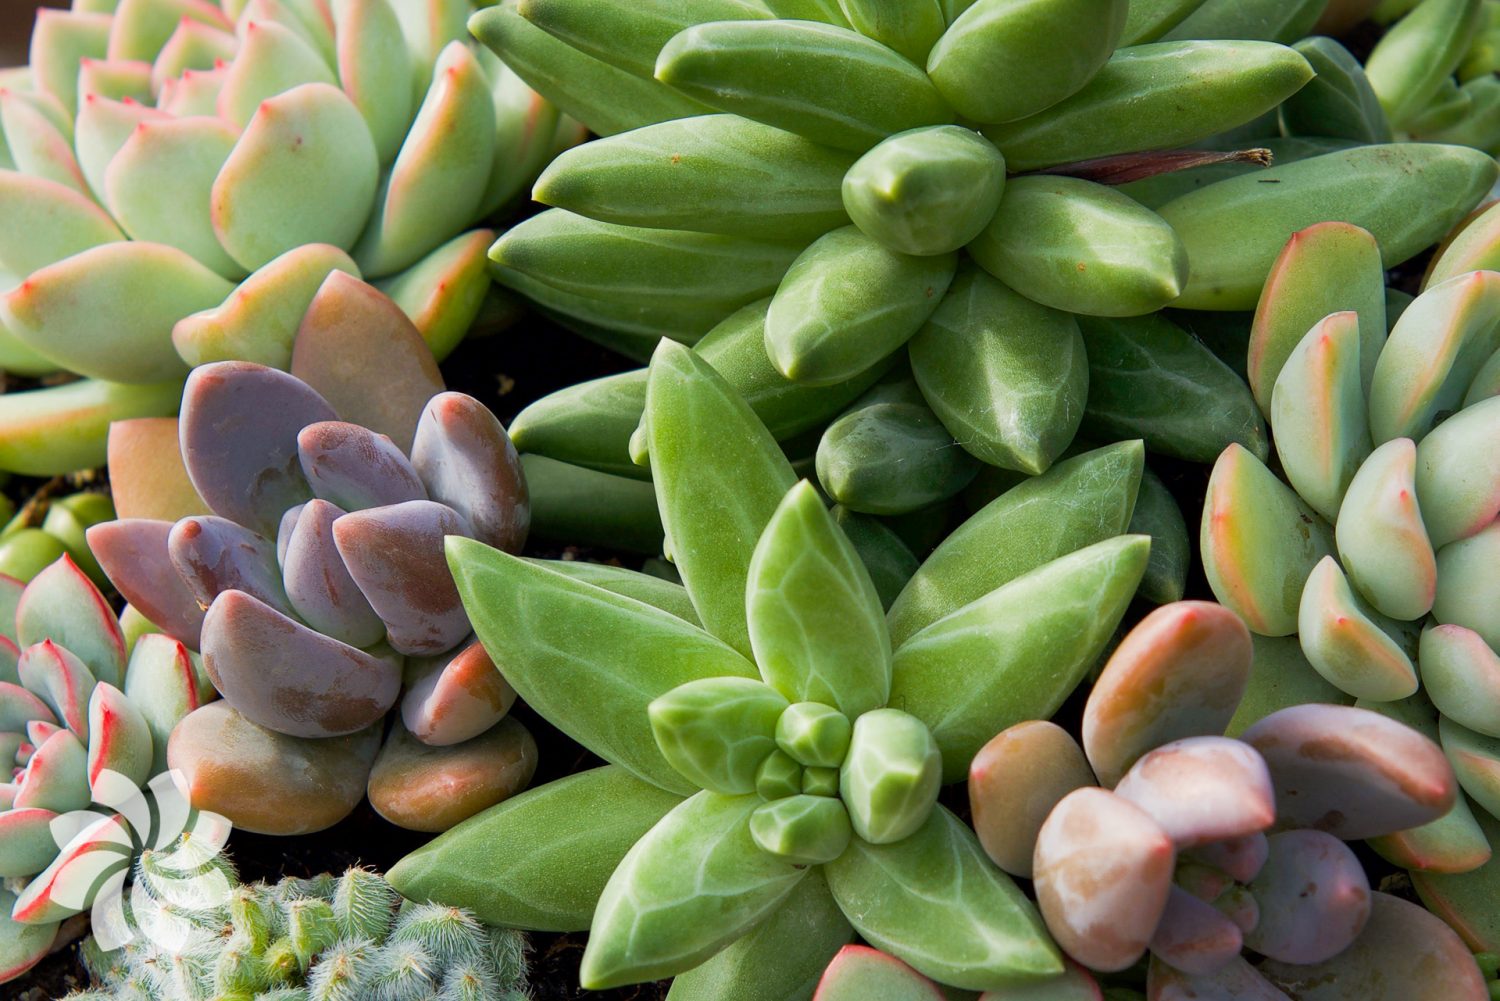 Where Did Succulents Come From